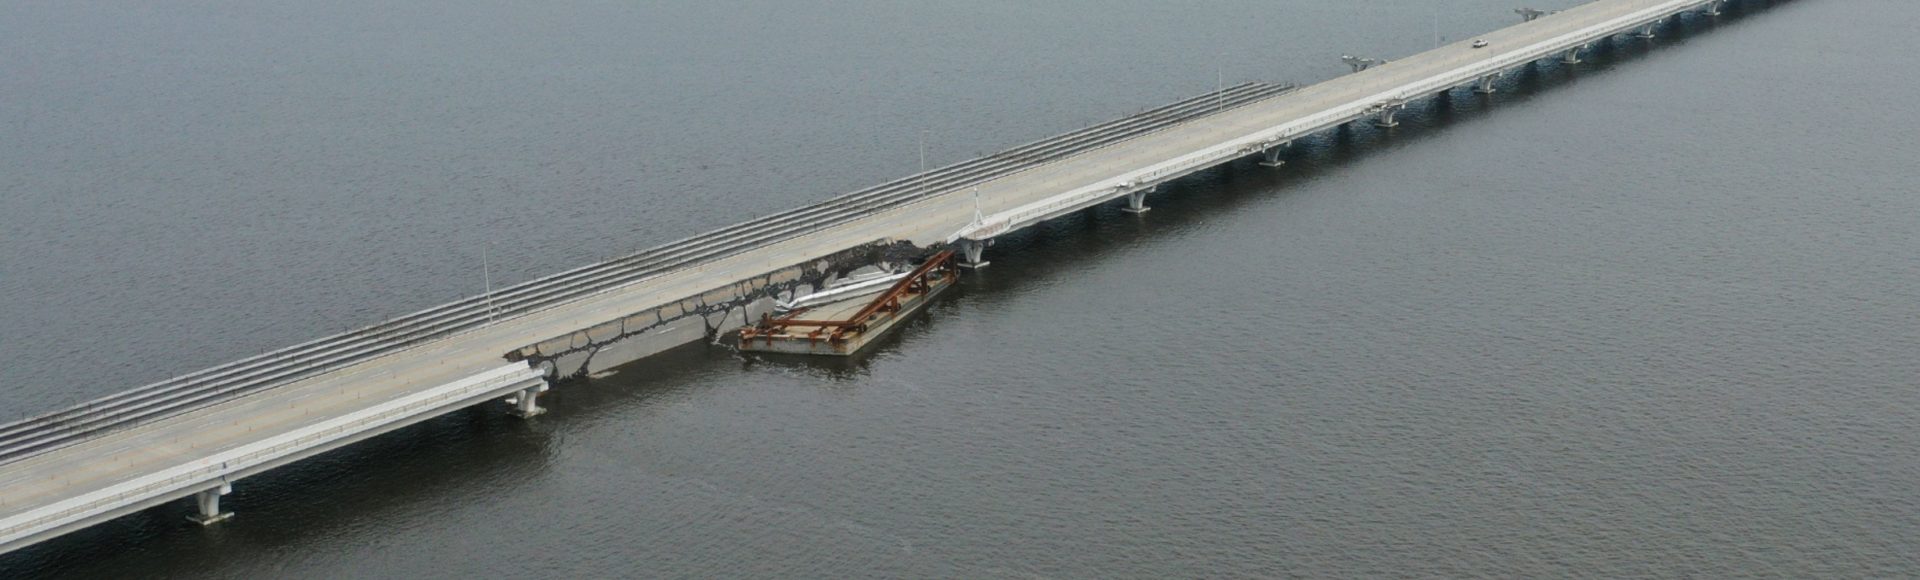 3-mile bridge, or Pensacola Bay Bridge, after hurricane Sally hit. Skanska (a construction company) had barges near the bridge, resulting in the bridge outage. This image shows where the loose barge struck the bridge, taking out the entire bridge.